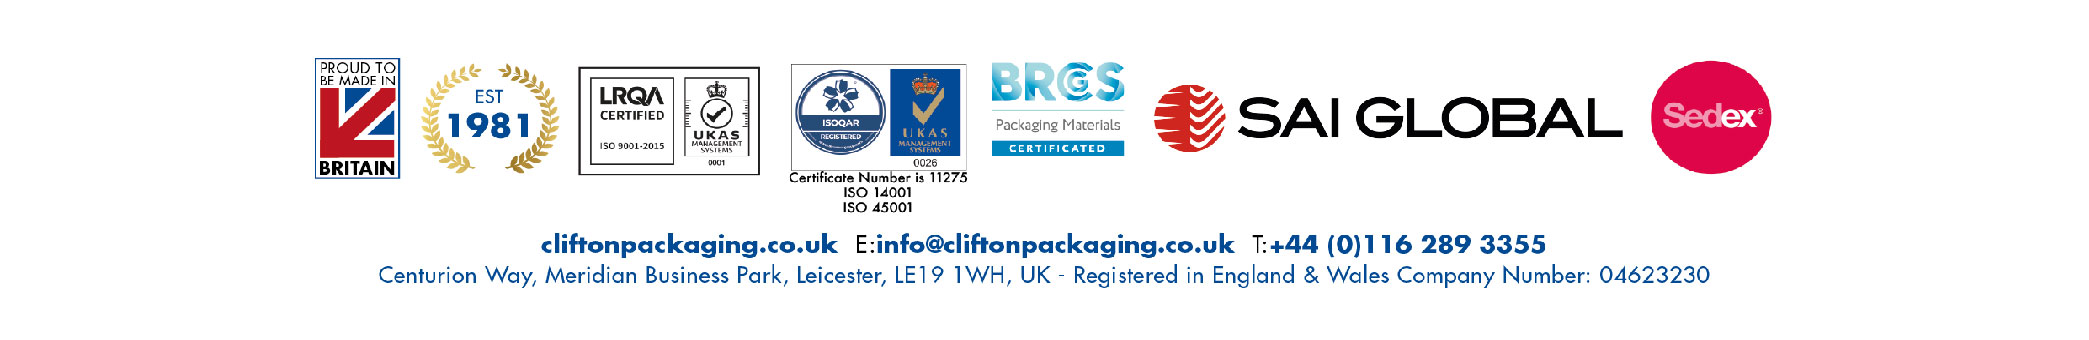 Accreditation's. Clifton Packaging Group Ltd.